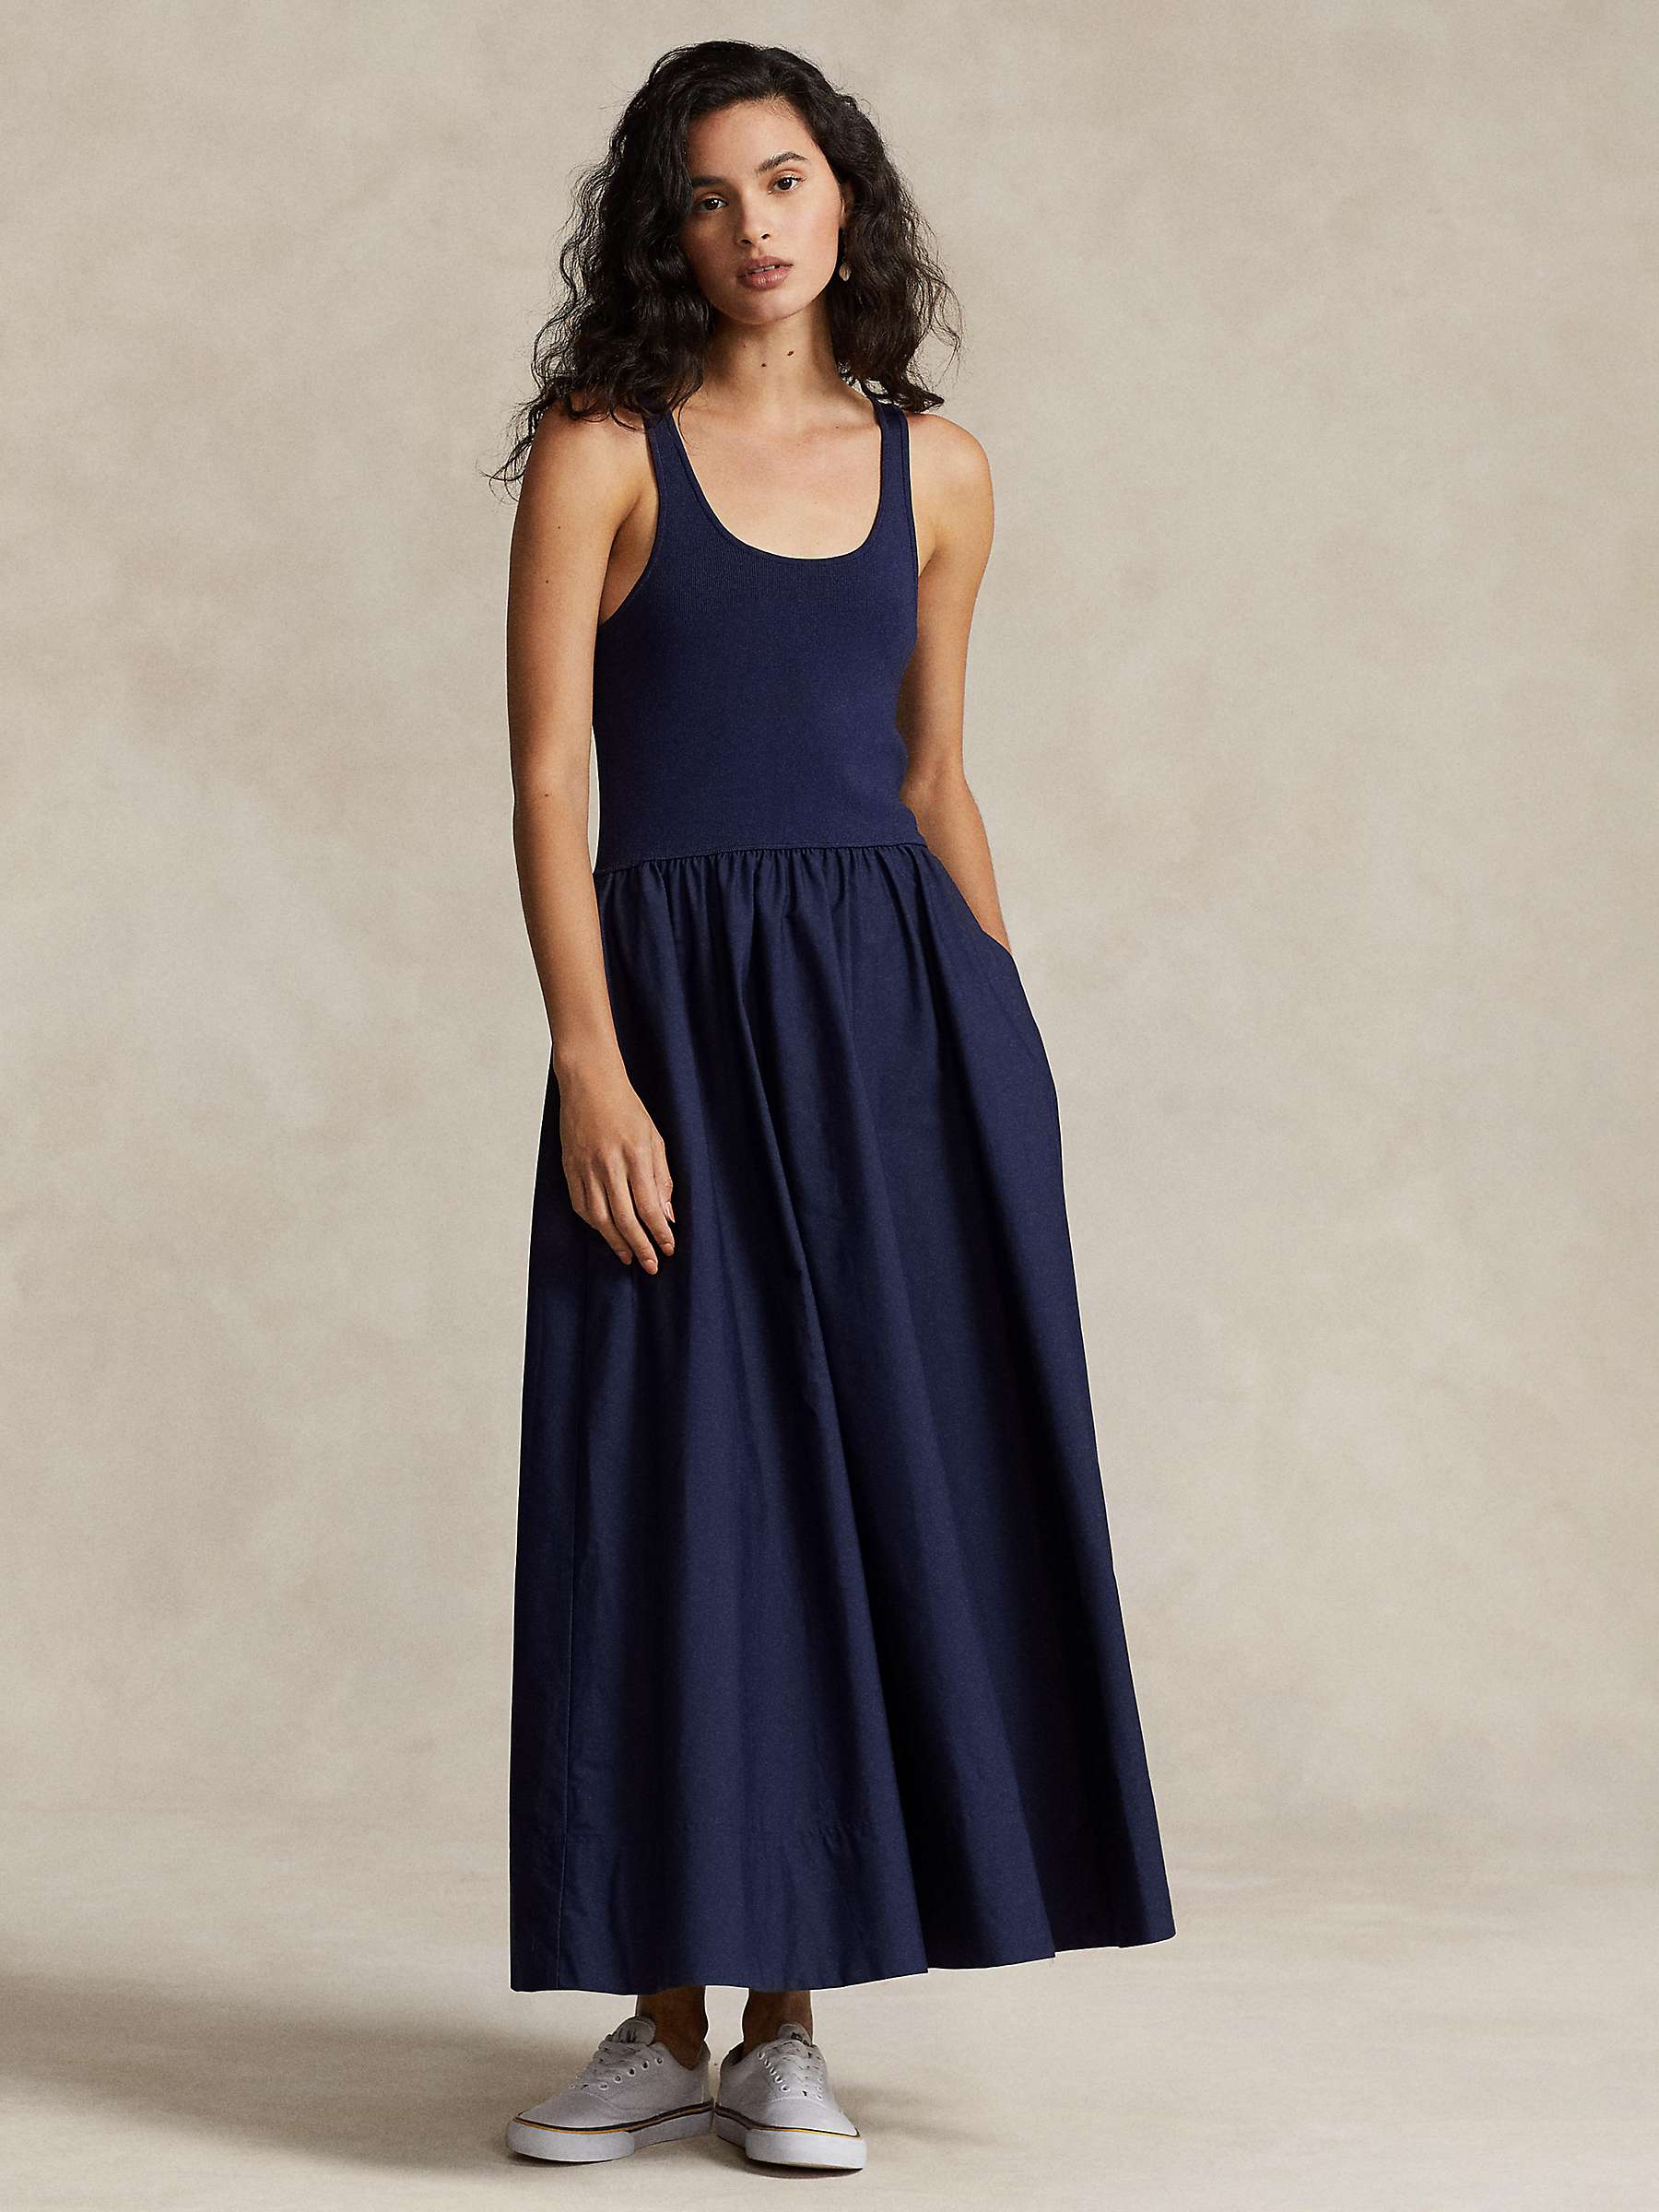 Buy Polo Ralph Lauren Zaha Fit and Flare Midi Dress, Navy Online at johnlewis.com